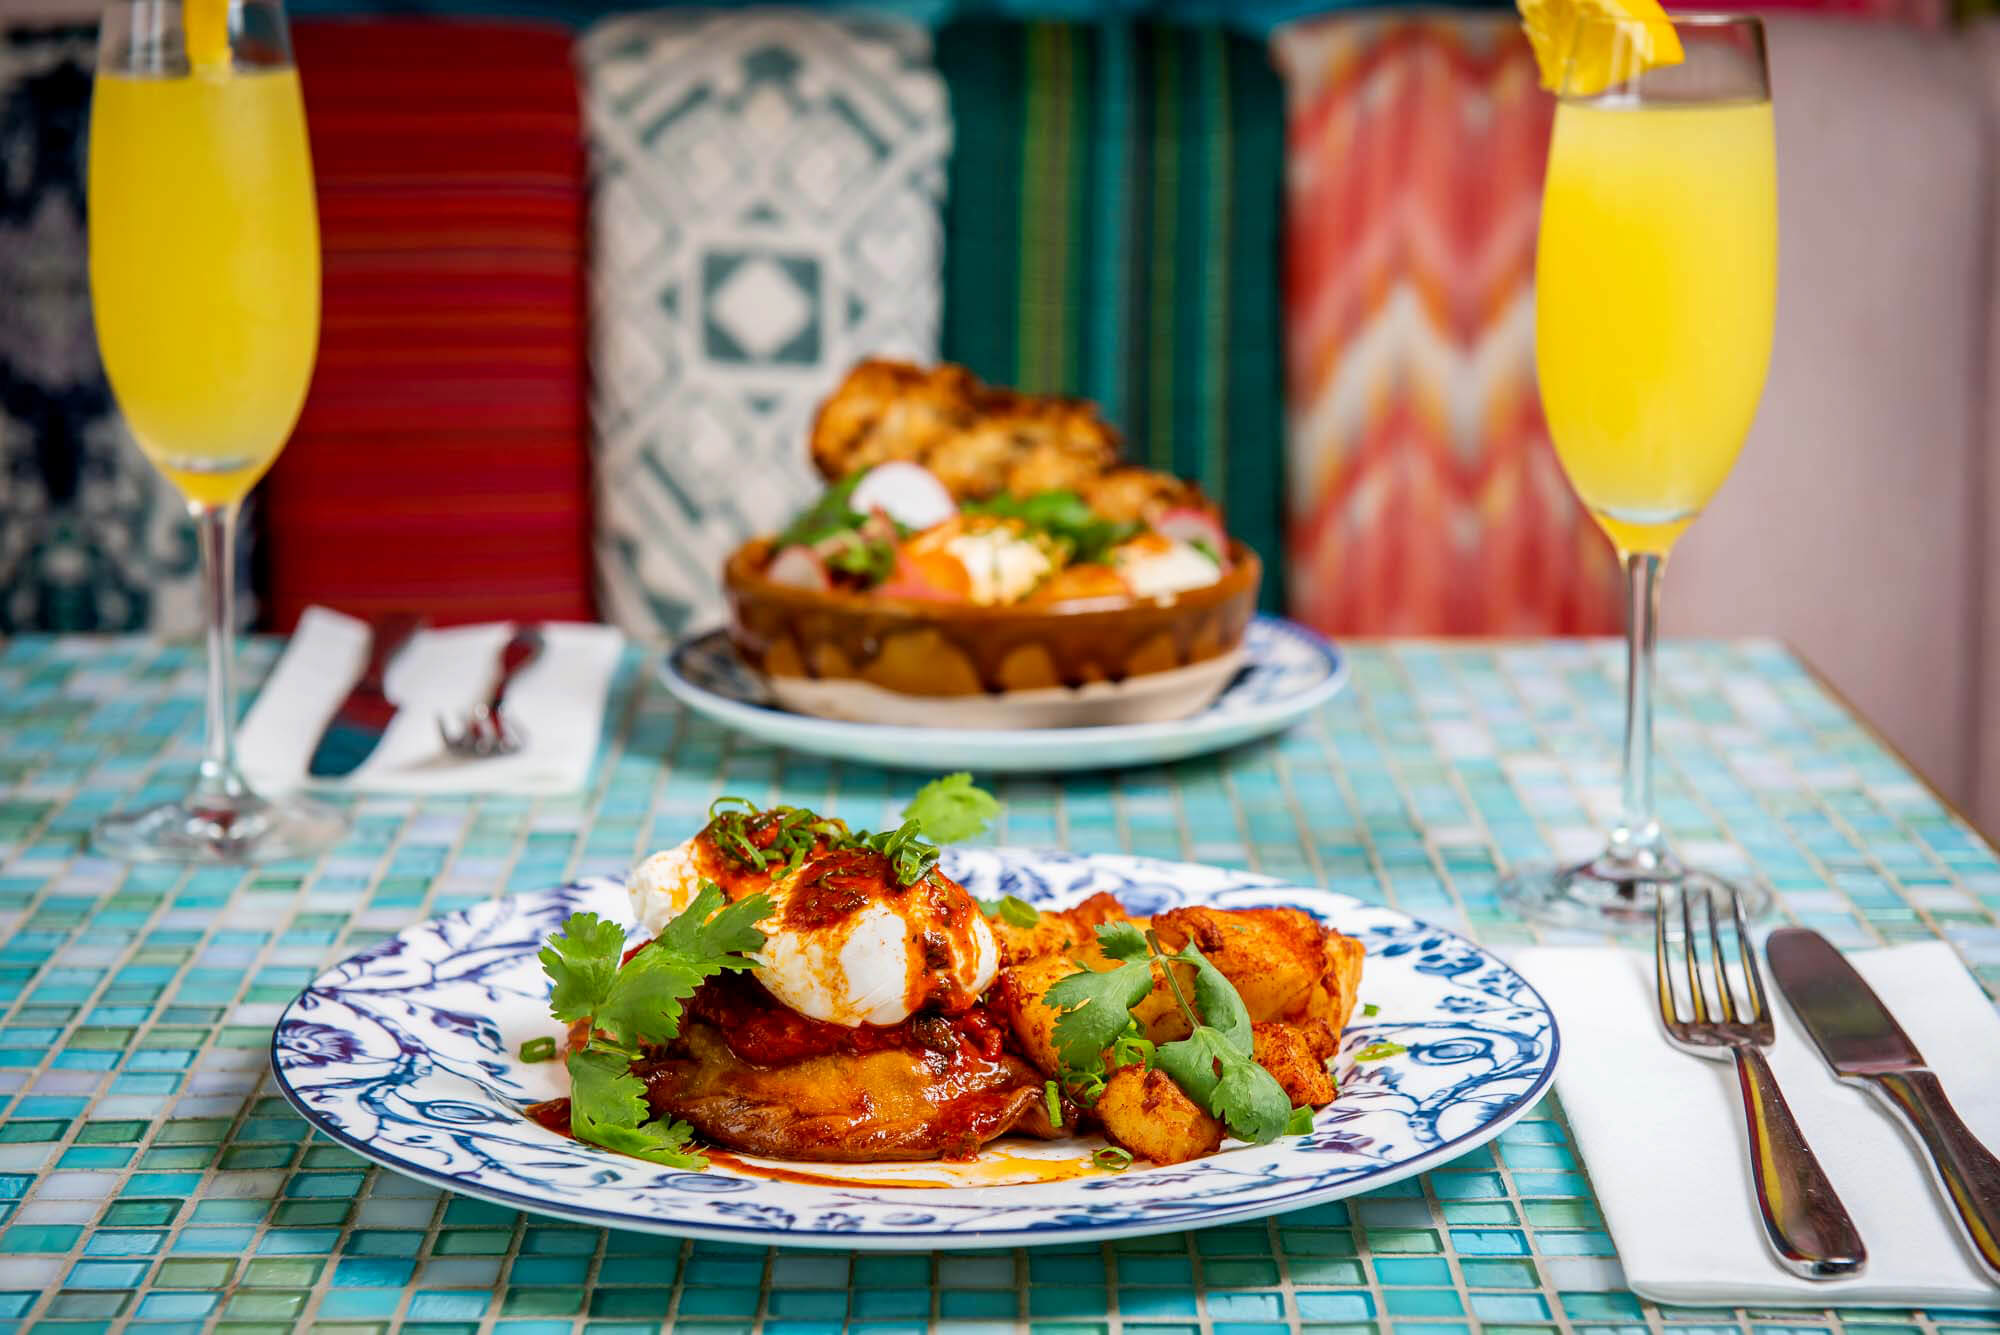 Two plates with empanadas and mimosas on a colourful table.